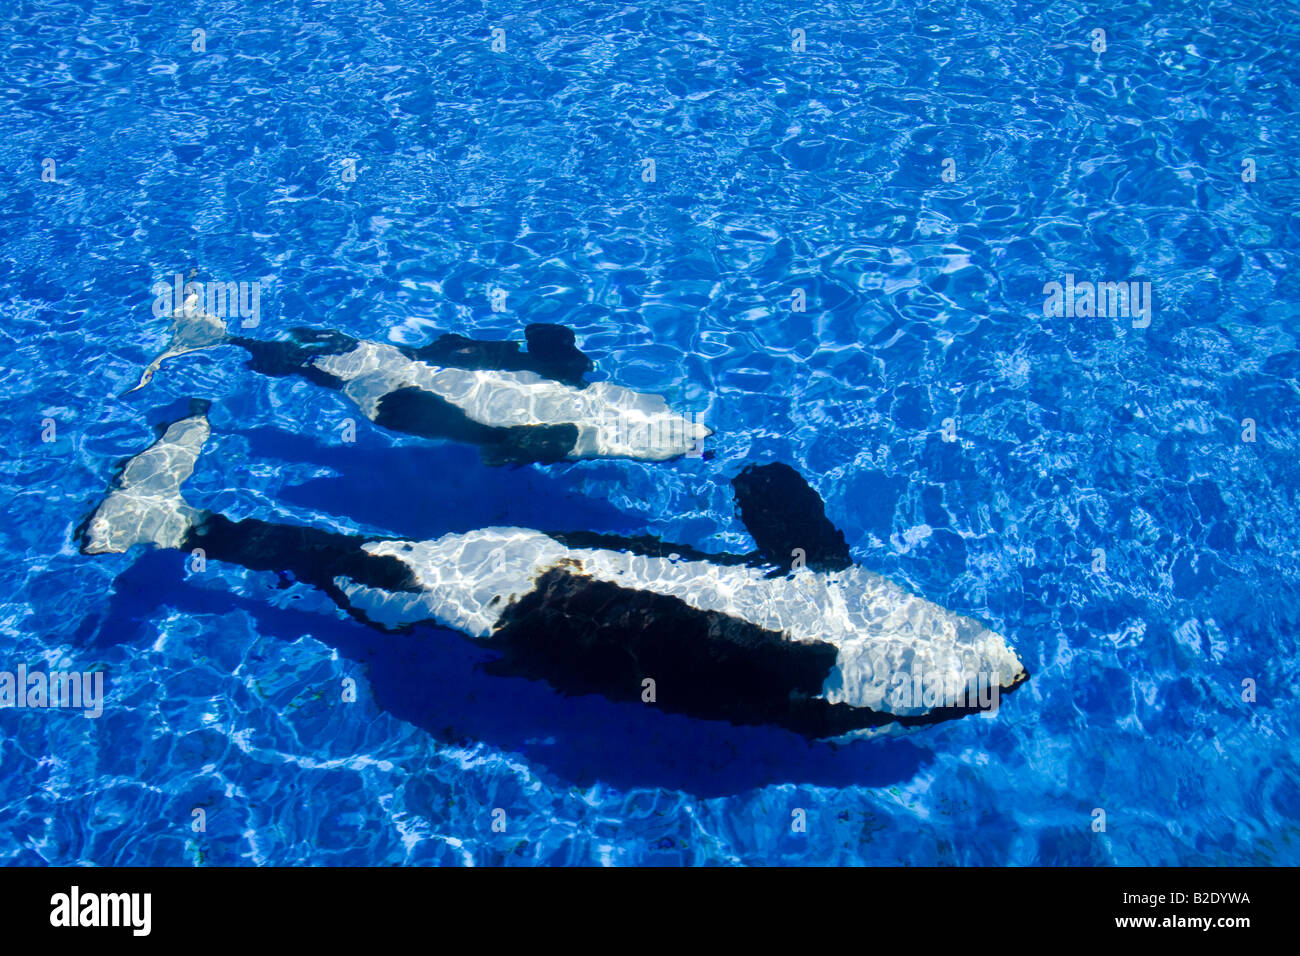 Orca or killer whales, Orcinus orca, swimming upside down in their holding tank at Sea World in San Diego, California, USA. Stock Photo